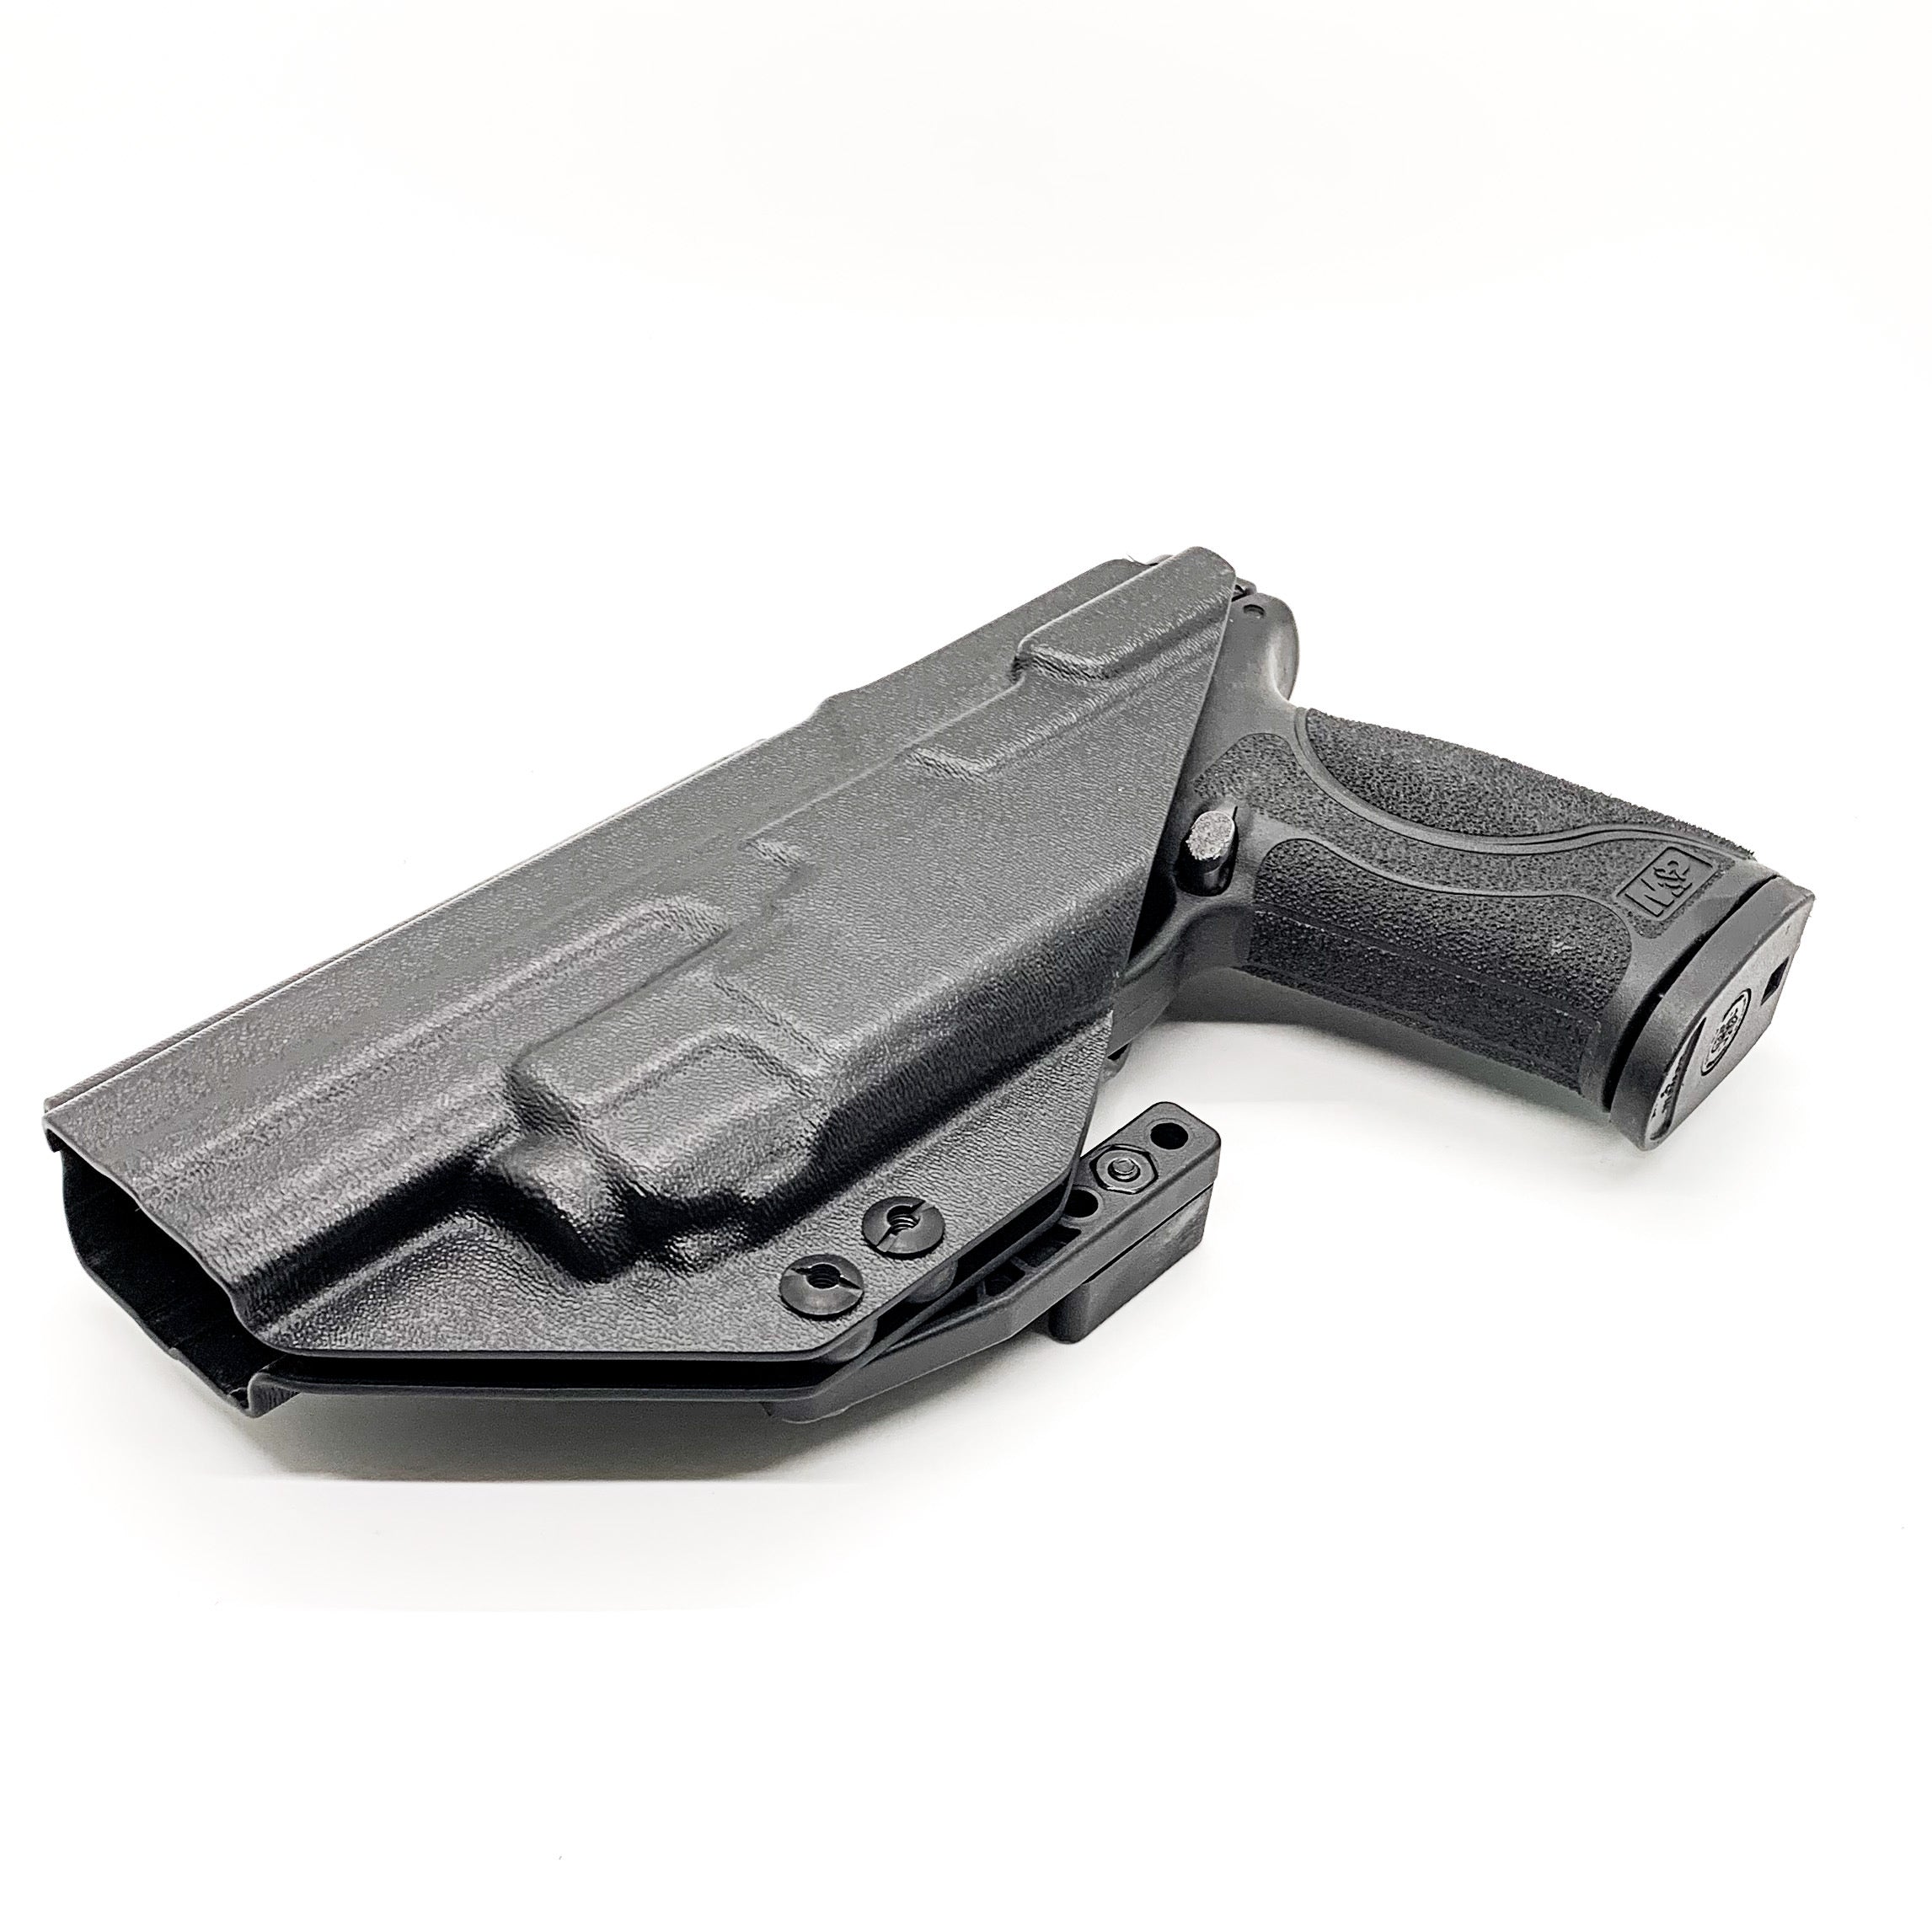 For the best inside Waistband IWB AIWB Kydex Holster designed to fit the Smith & Wesson M&P M2.0 5" pistols with the Streamlight TLR-8 or TLR-8A light mounted to the pistol shop Four Brothers Holsters. Full sweat guard, adjustable retention, smooth edges reduces printing. Cleared for red dot sights. Made in the USA. 